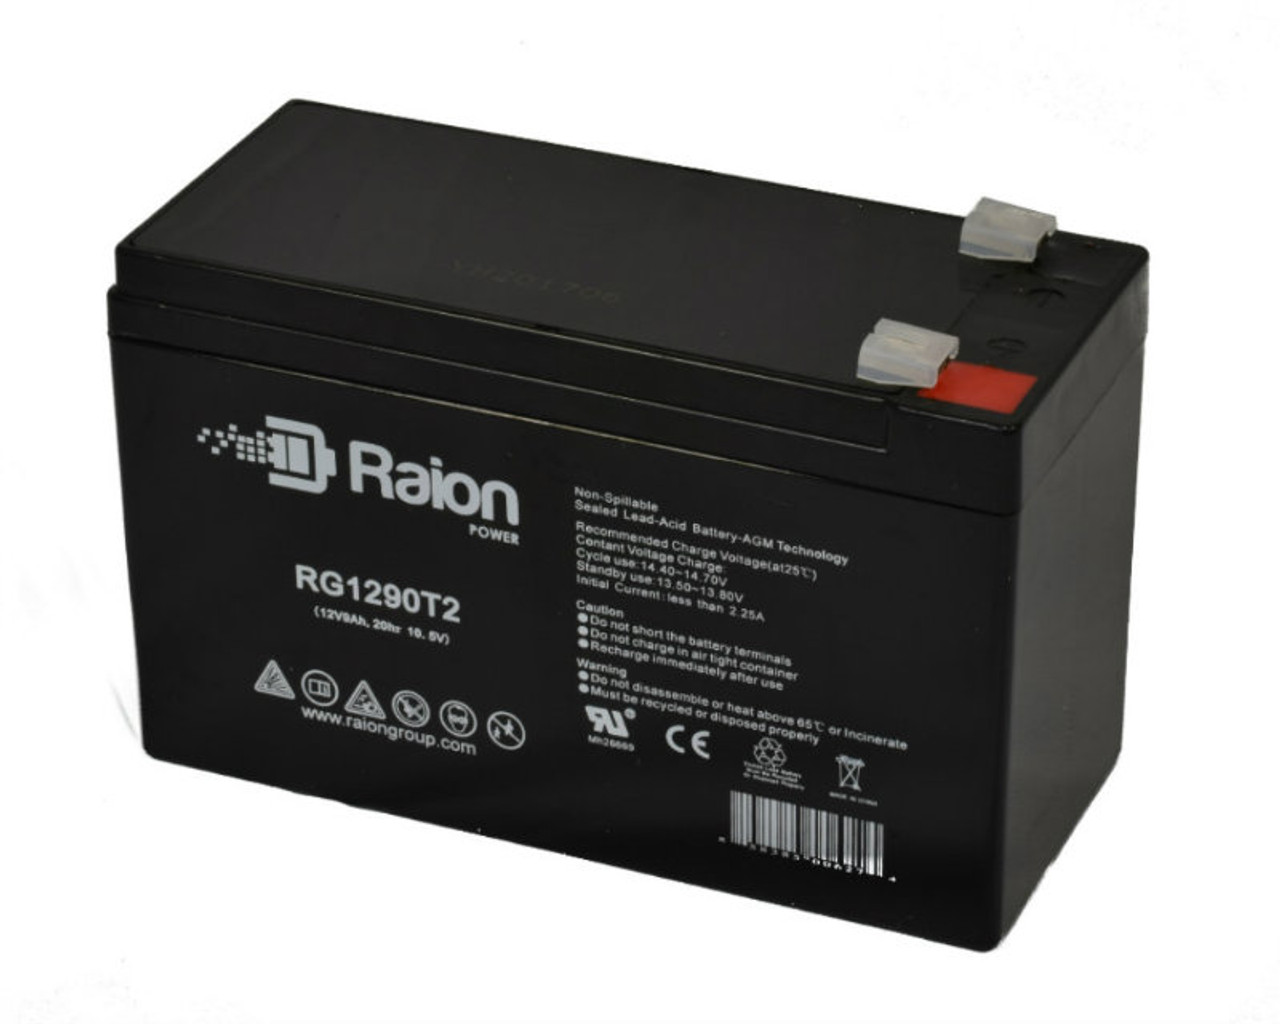 Raion Power RG1290T2 12V 9Ah AGM Battery for Cellpower CPW 50-12